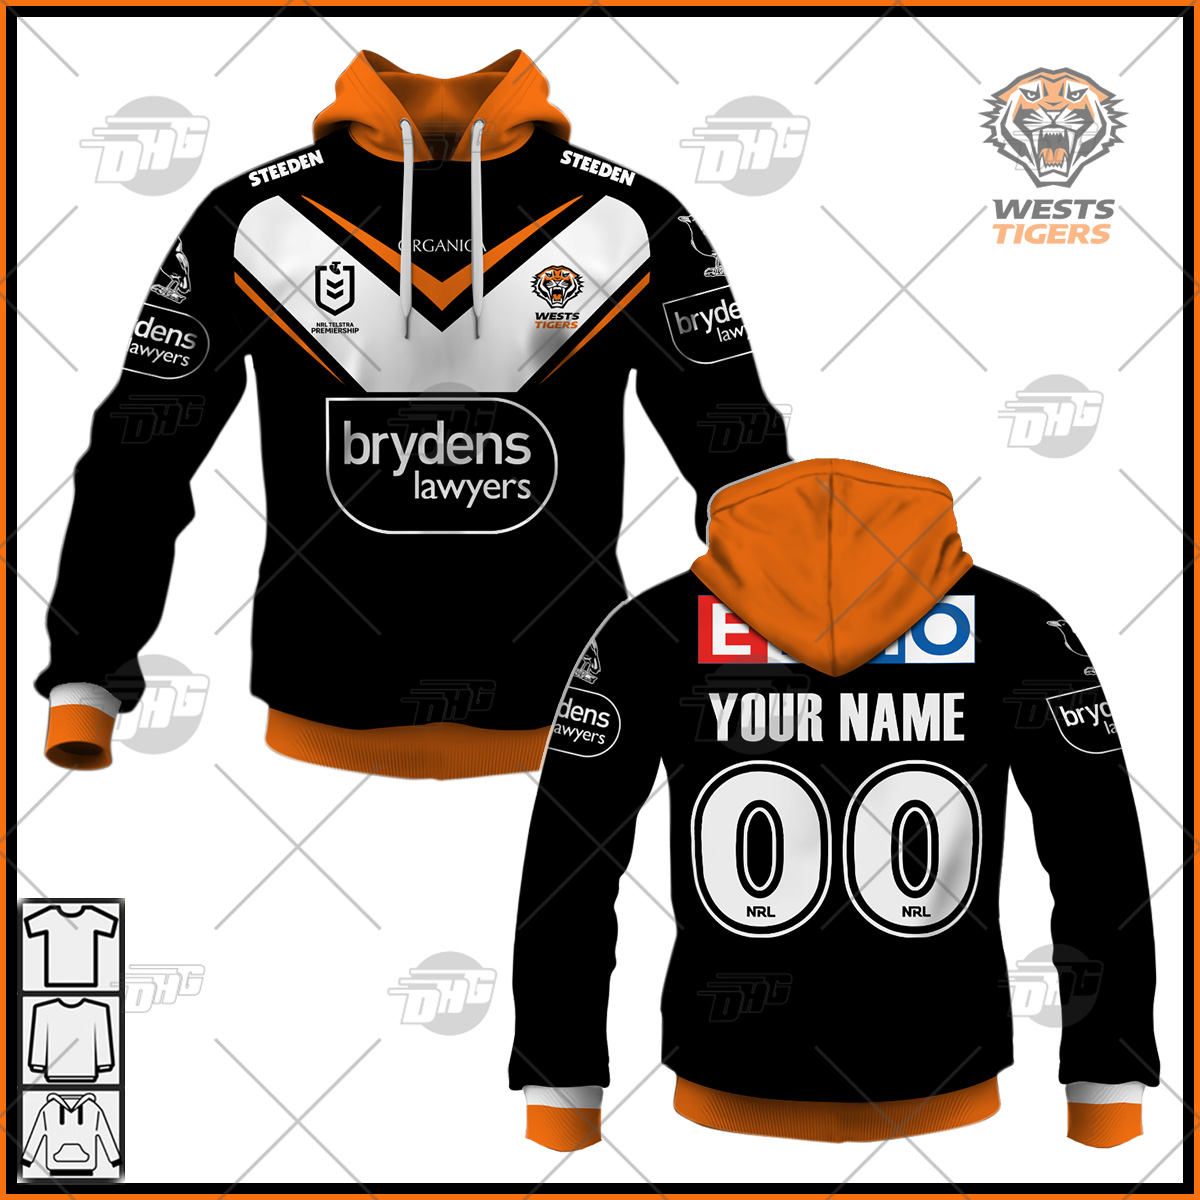 Wests Tigers 2005 NRL Home Jersey Sizes S-5XL! Premiership winning jersey!